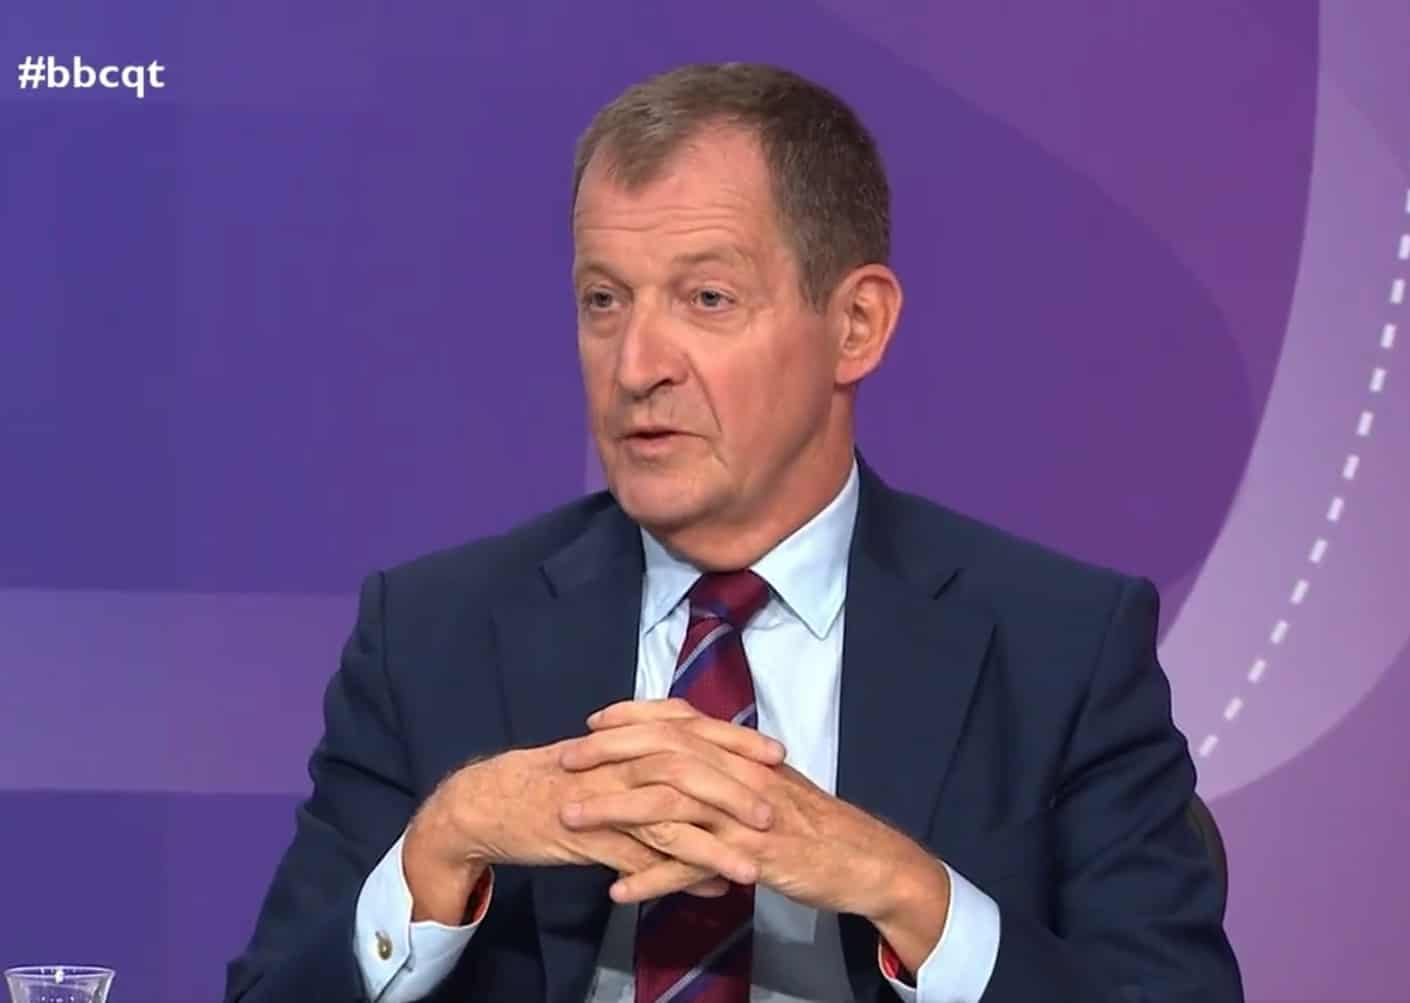 This Alastair Campbell takedown of Boris Johnson has been viewed over a million times